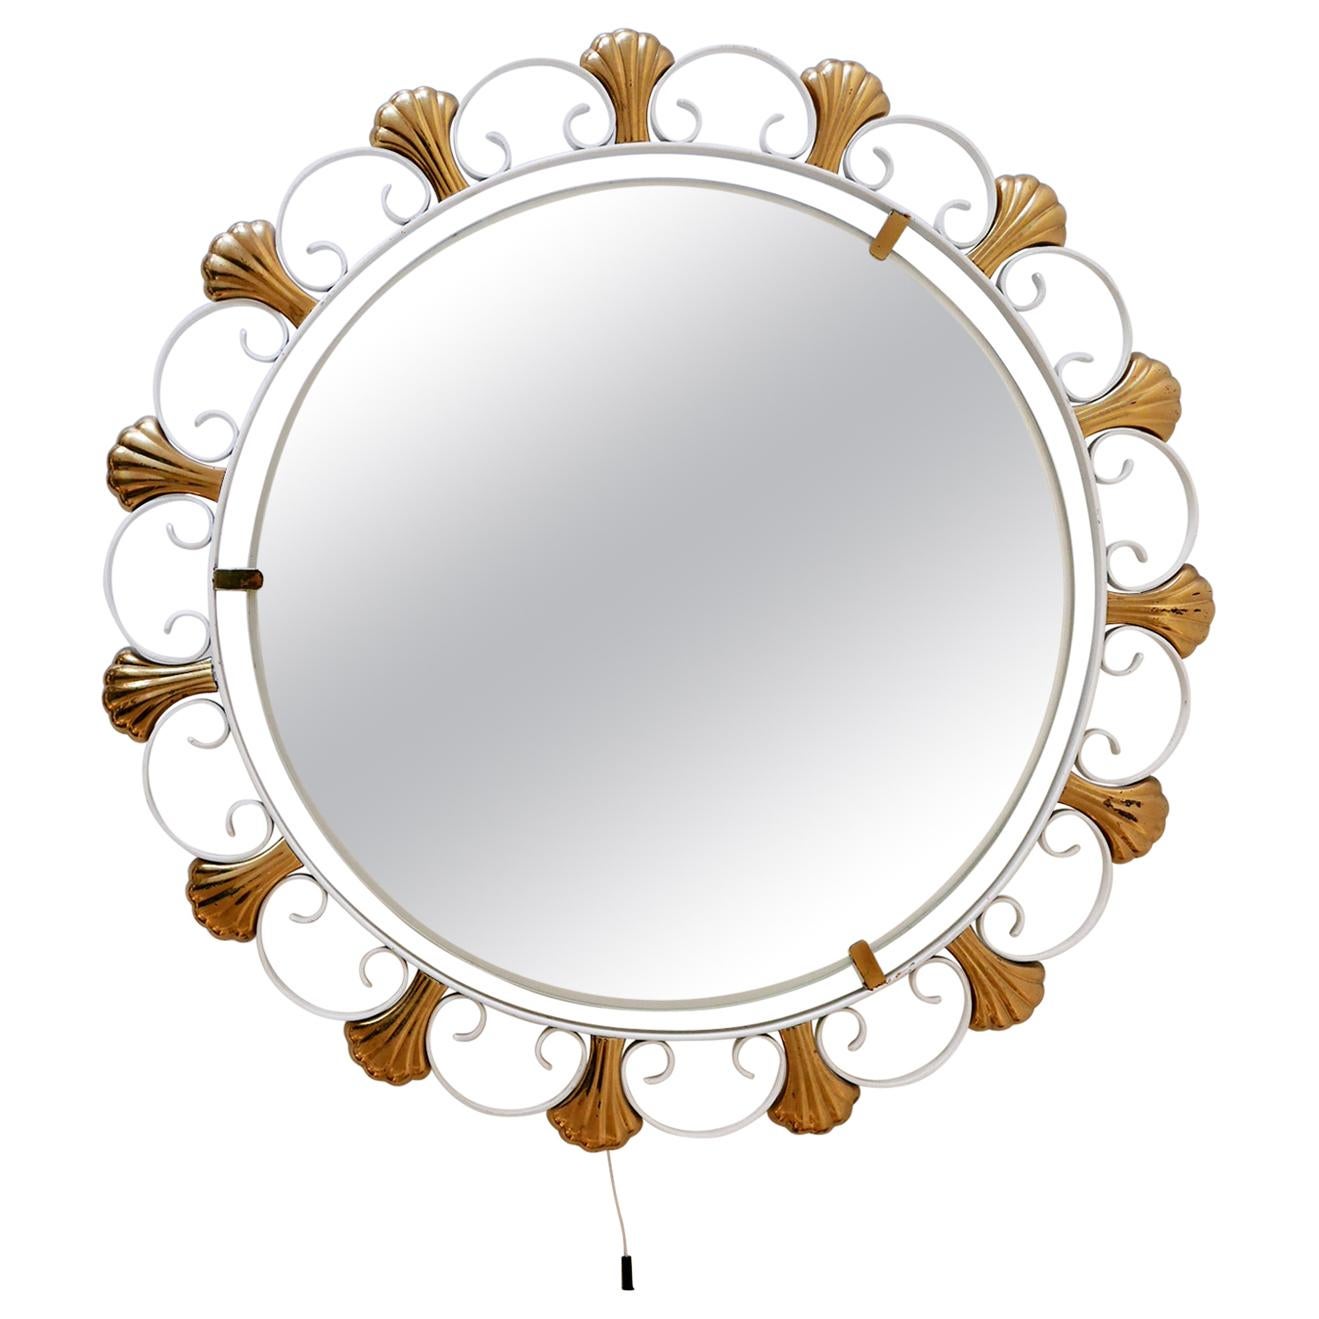 Elegant Mid-Century Modern Backlit Wall Mirror by Hillebrand, 1960s, Germany For Sale